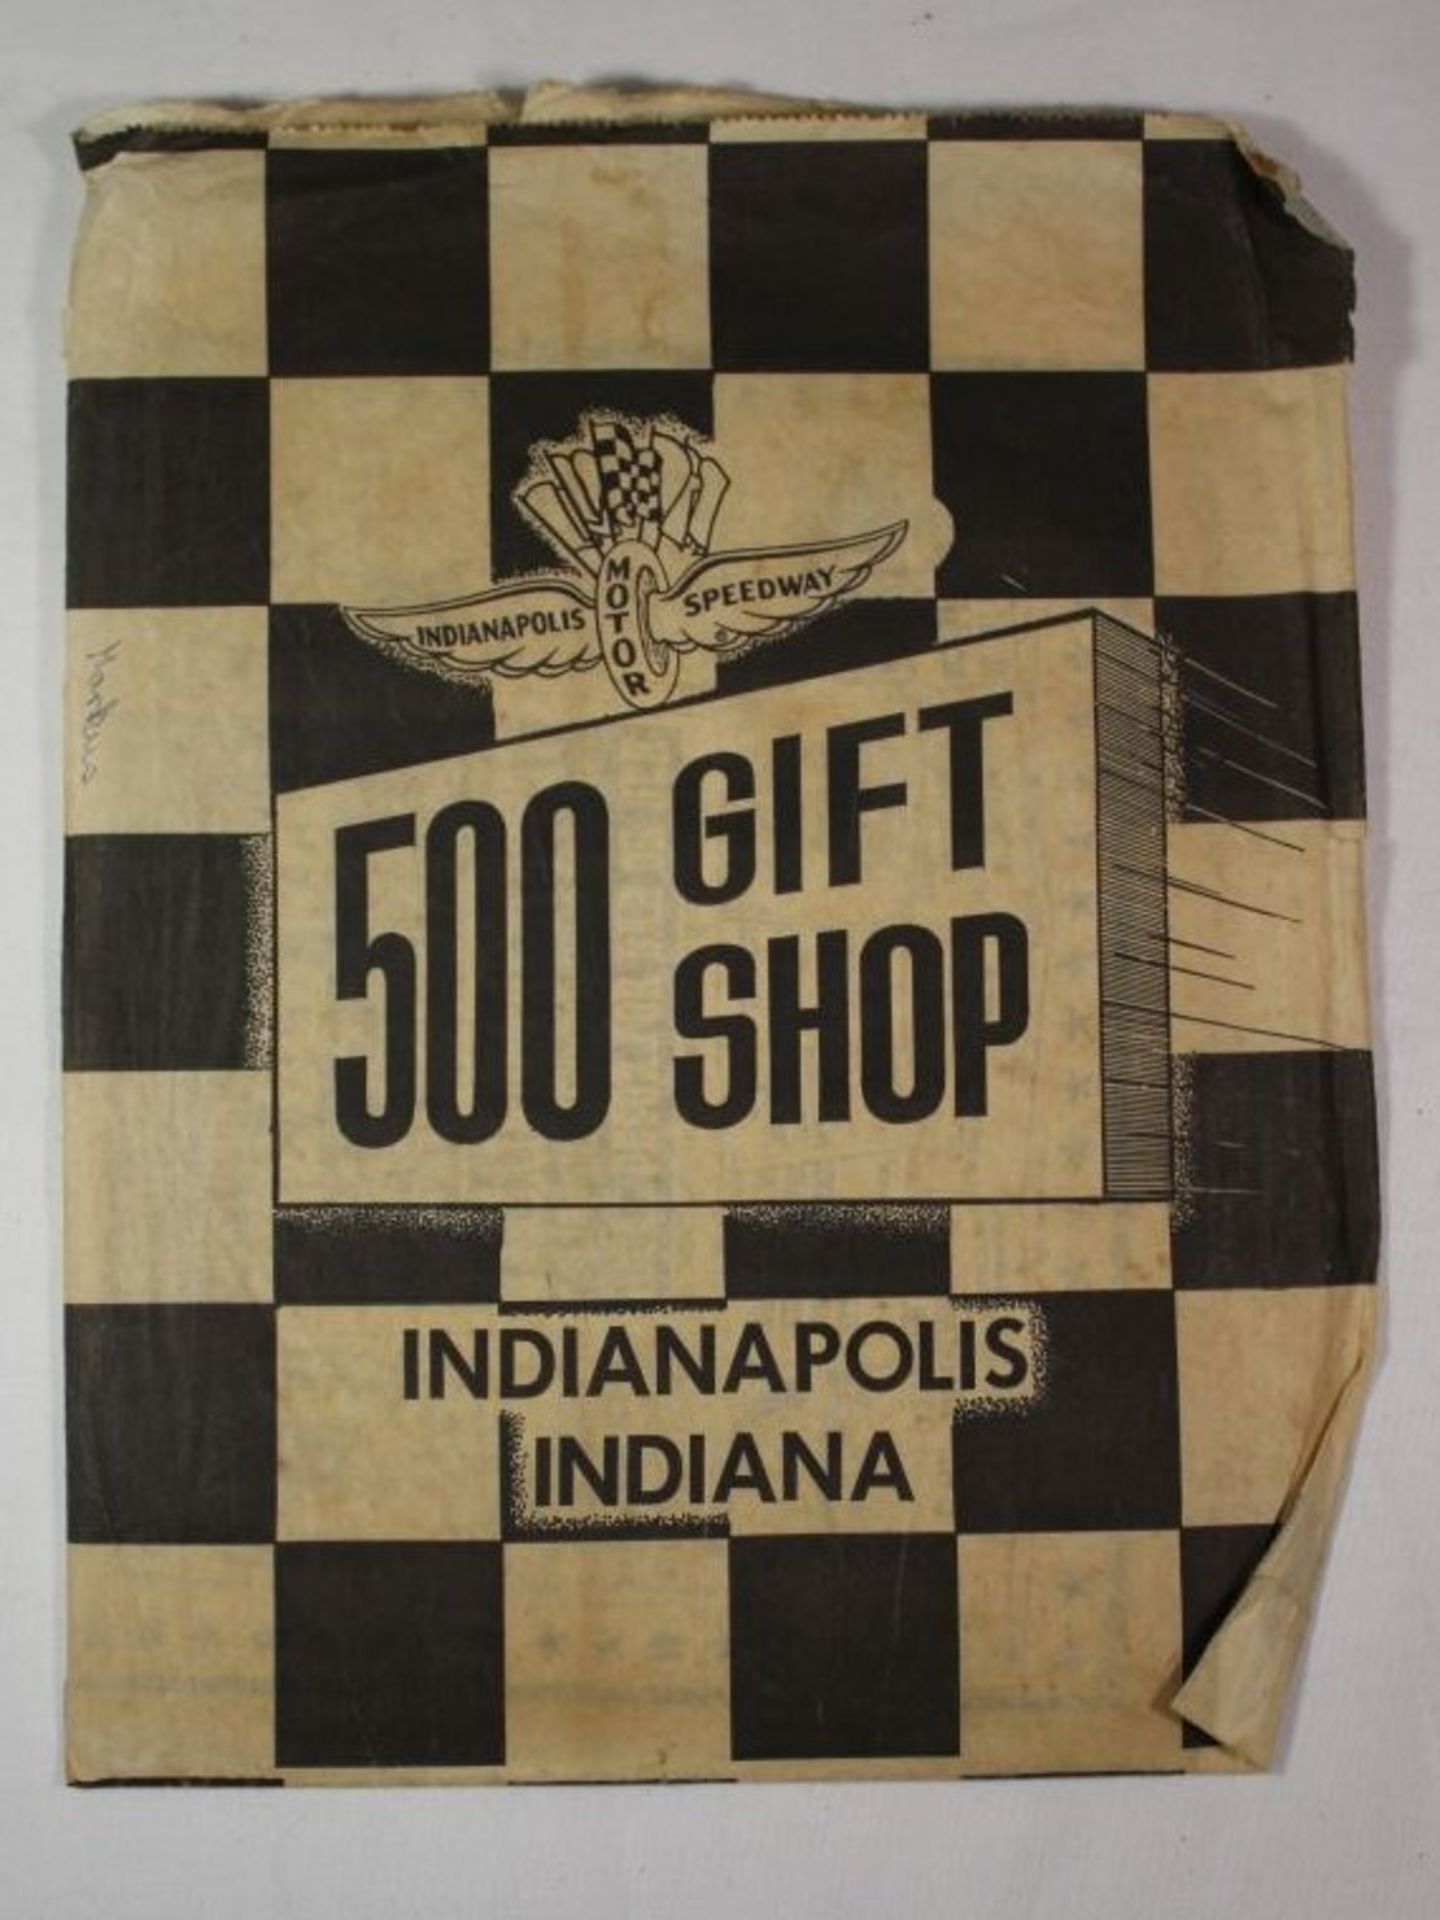 Wild-West Posters, Indianapolis 500 Gift Shop.